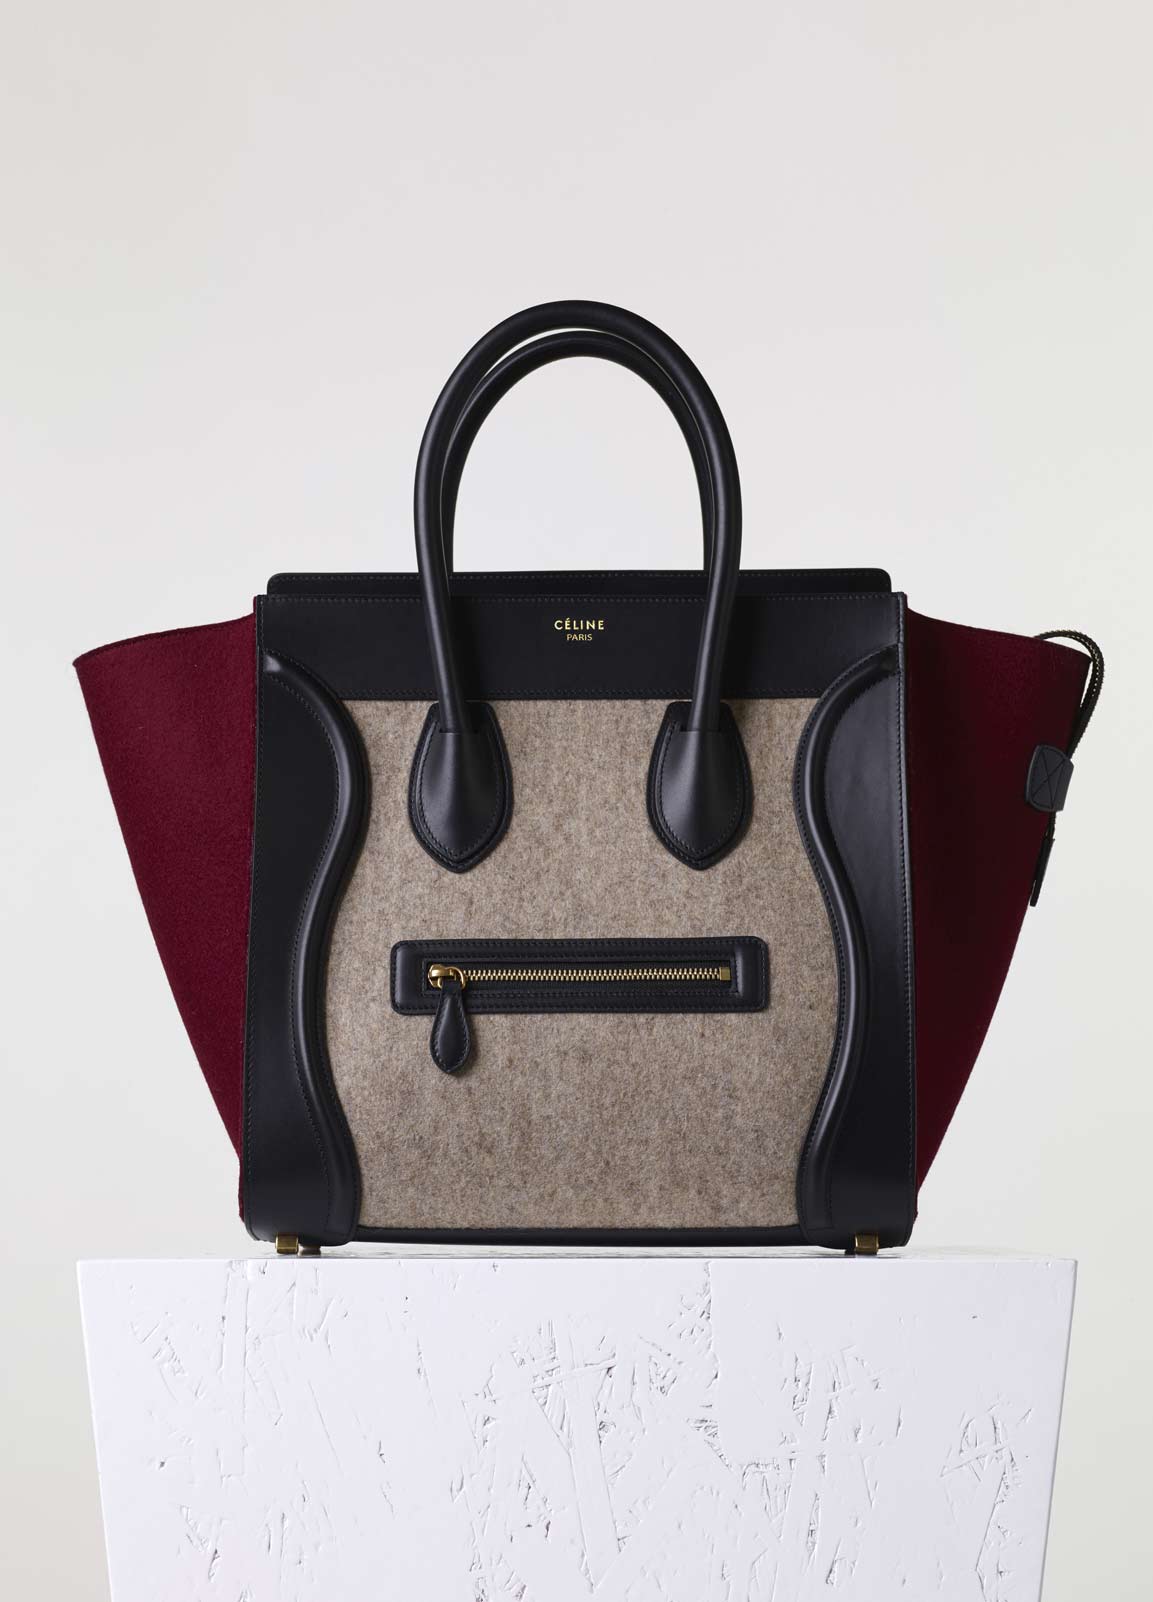 Celine Bag Price List Reference Guide | Spotted Fashion | Page 2  